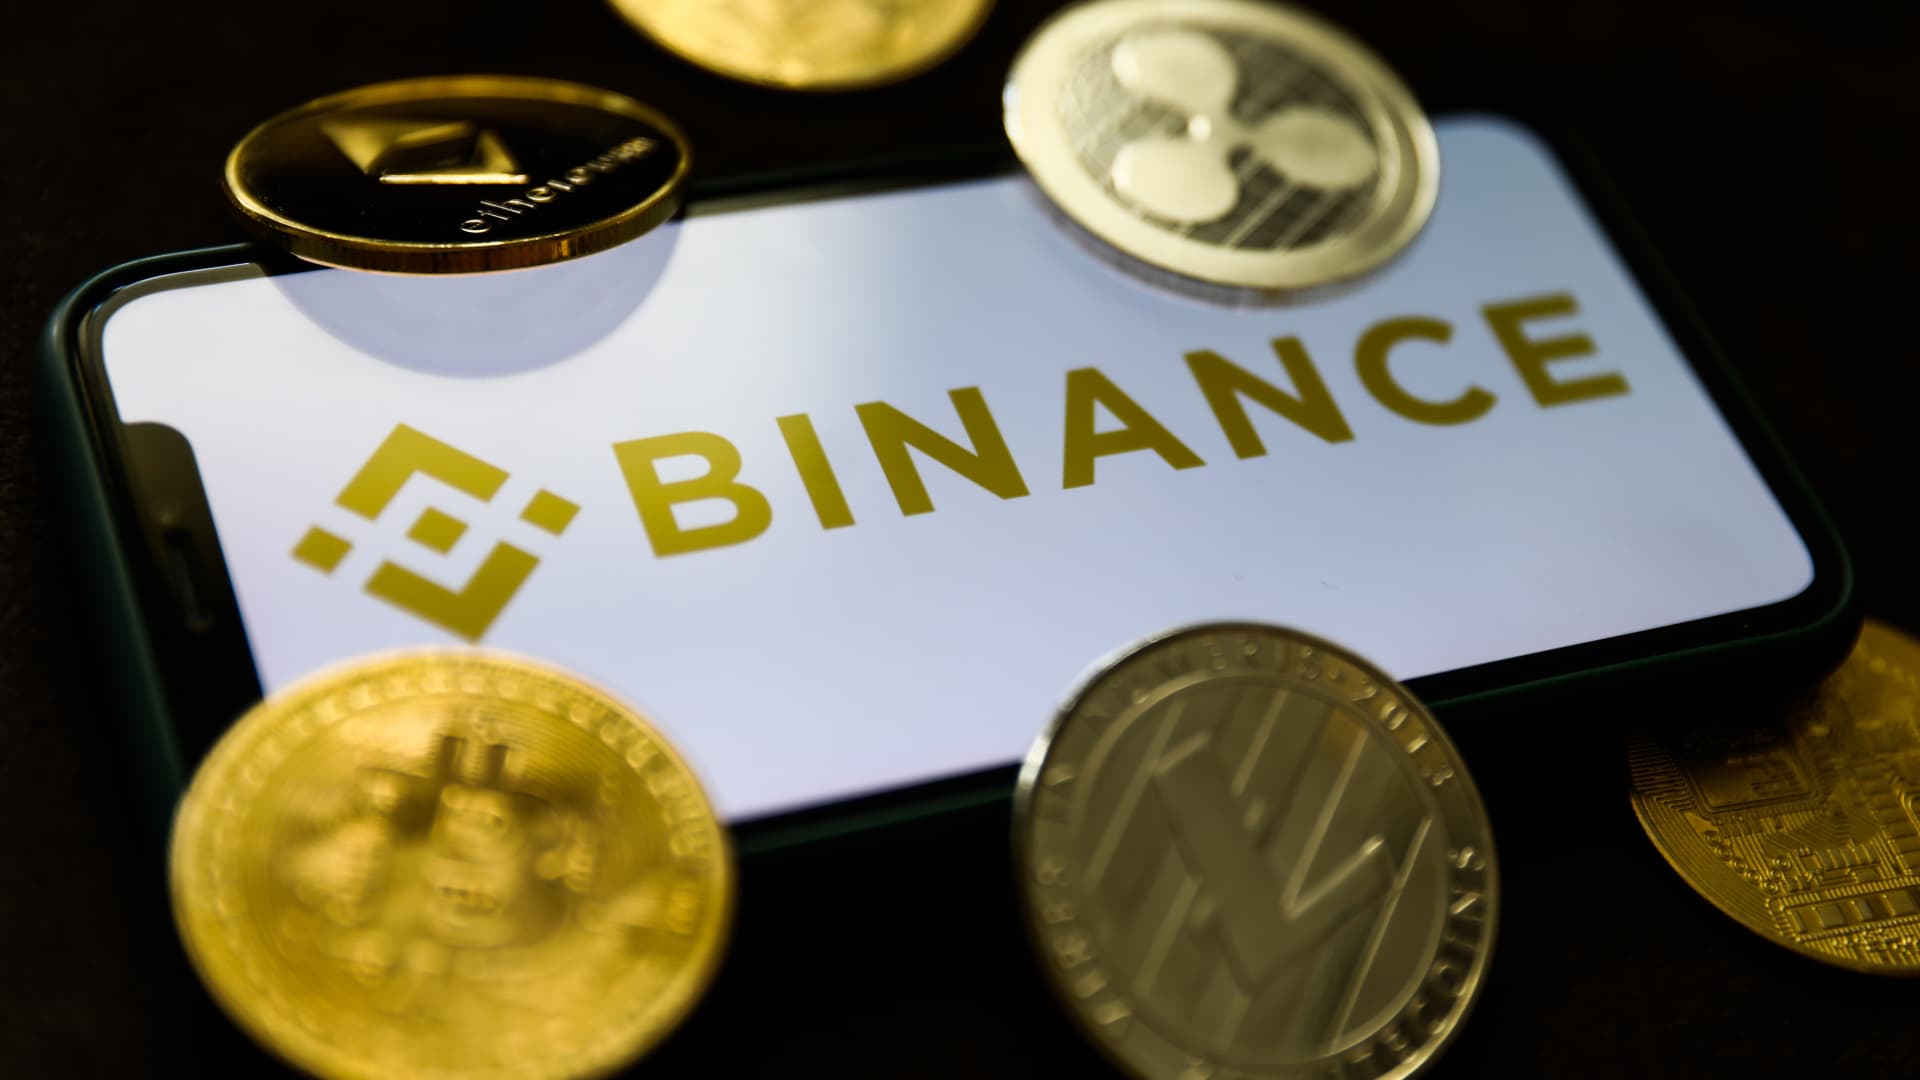 More than $100 million worth of Binance's BNB token stolen in another major crypto hack